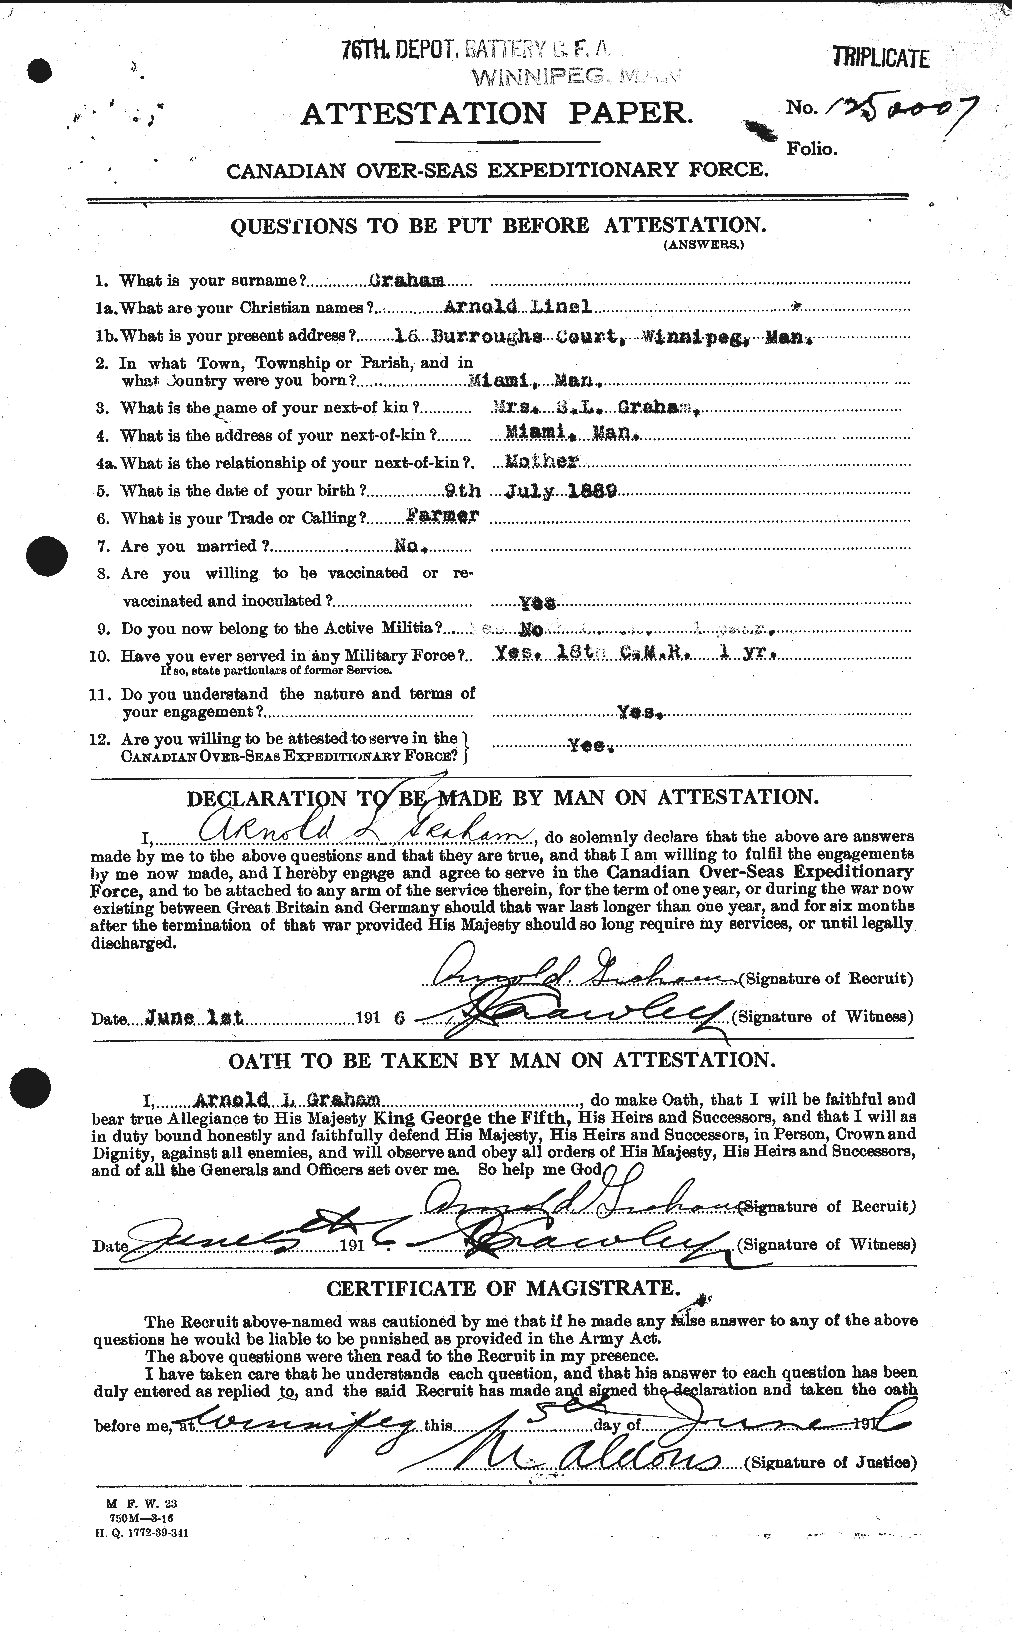 Personnel Records of the First World War - CEF 359648a